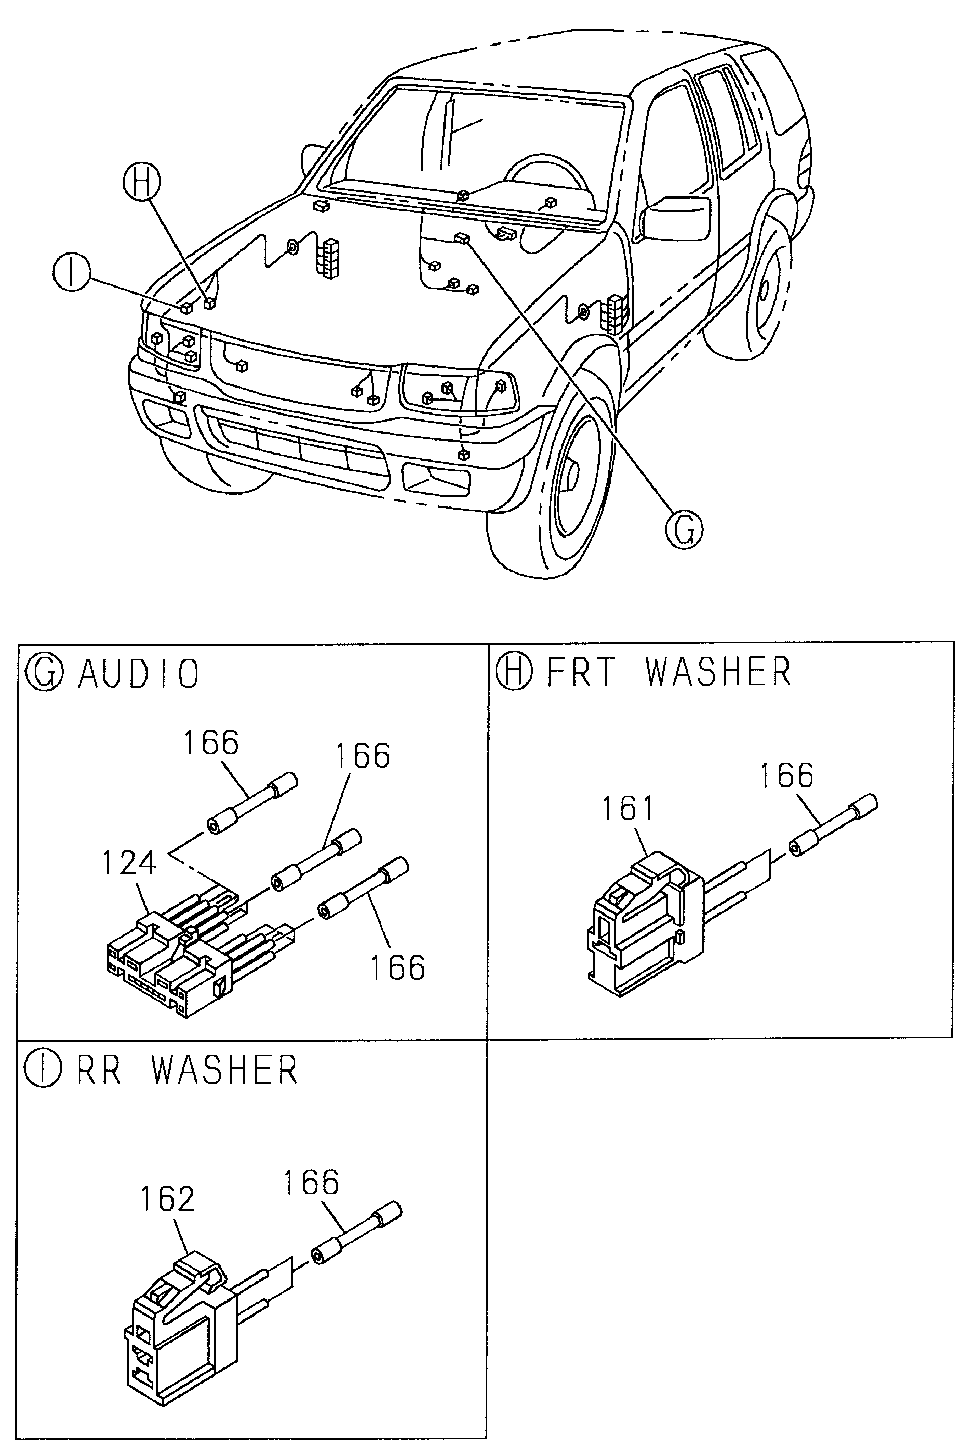 8-97214-661-0 - CONNECTOR, FR. WASHER